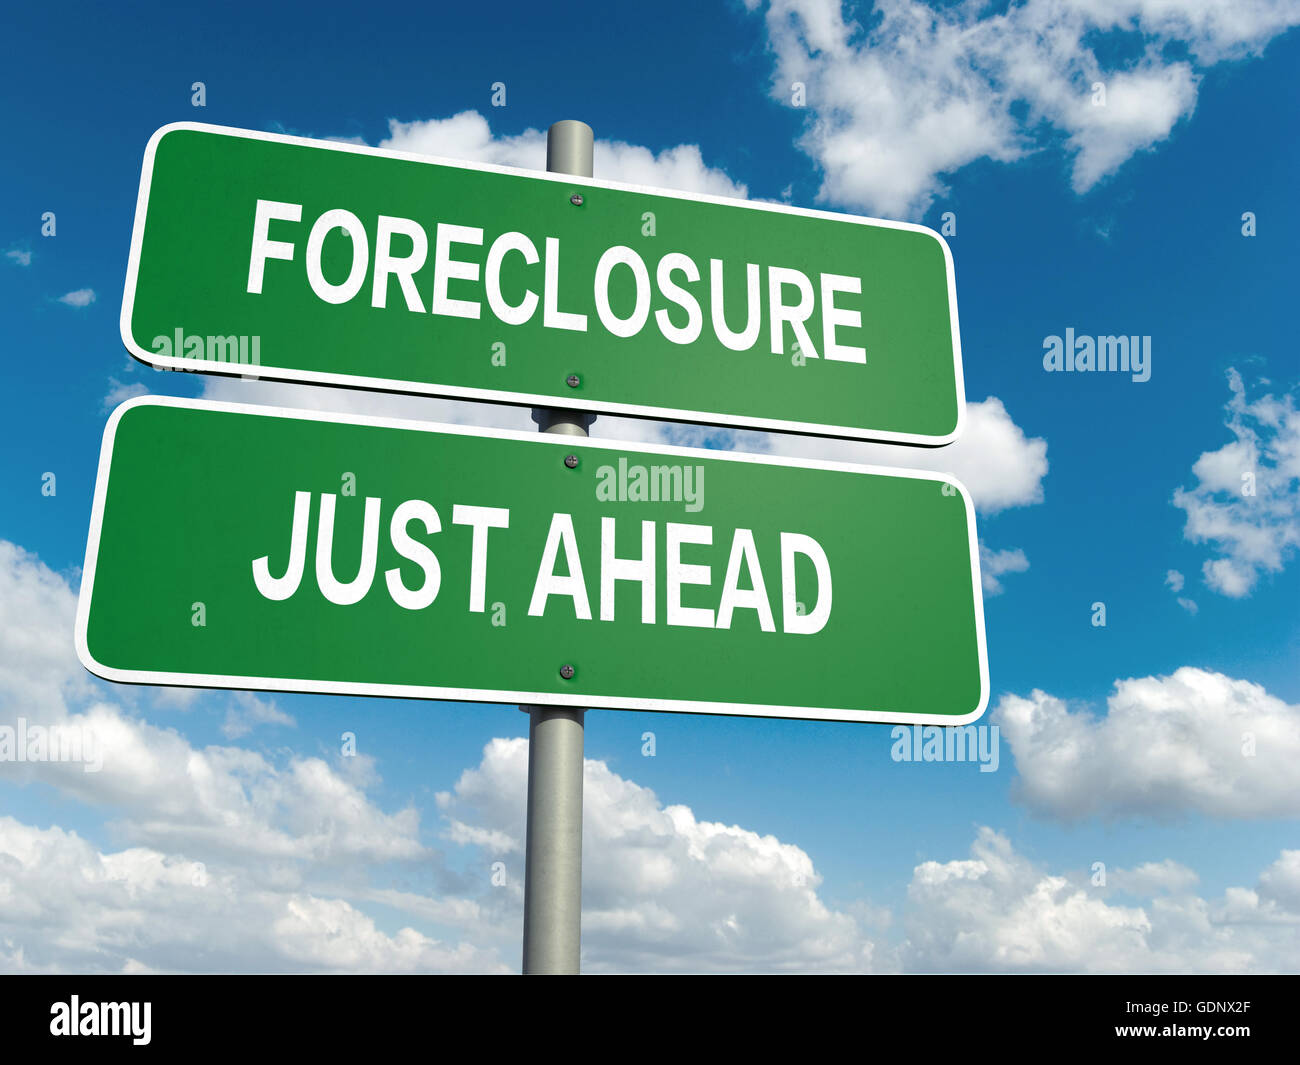 A road sign with foreclosure words on sky background Stock Photo